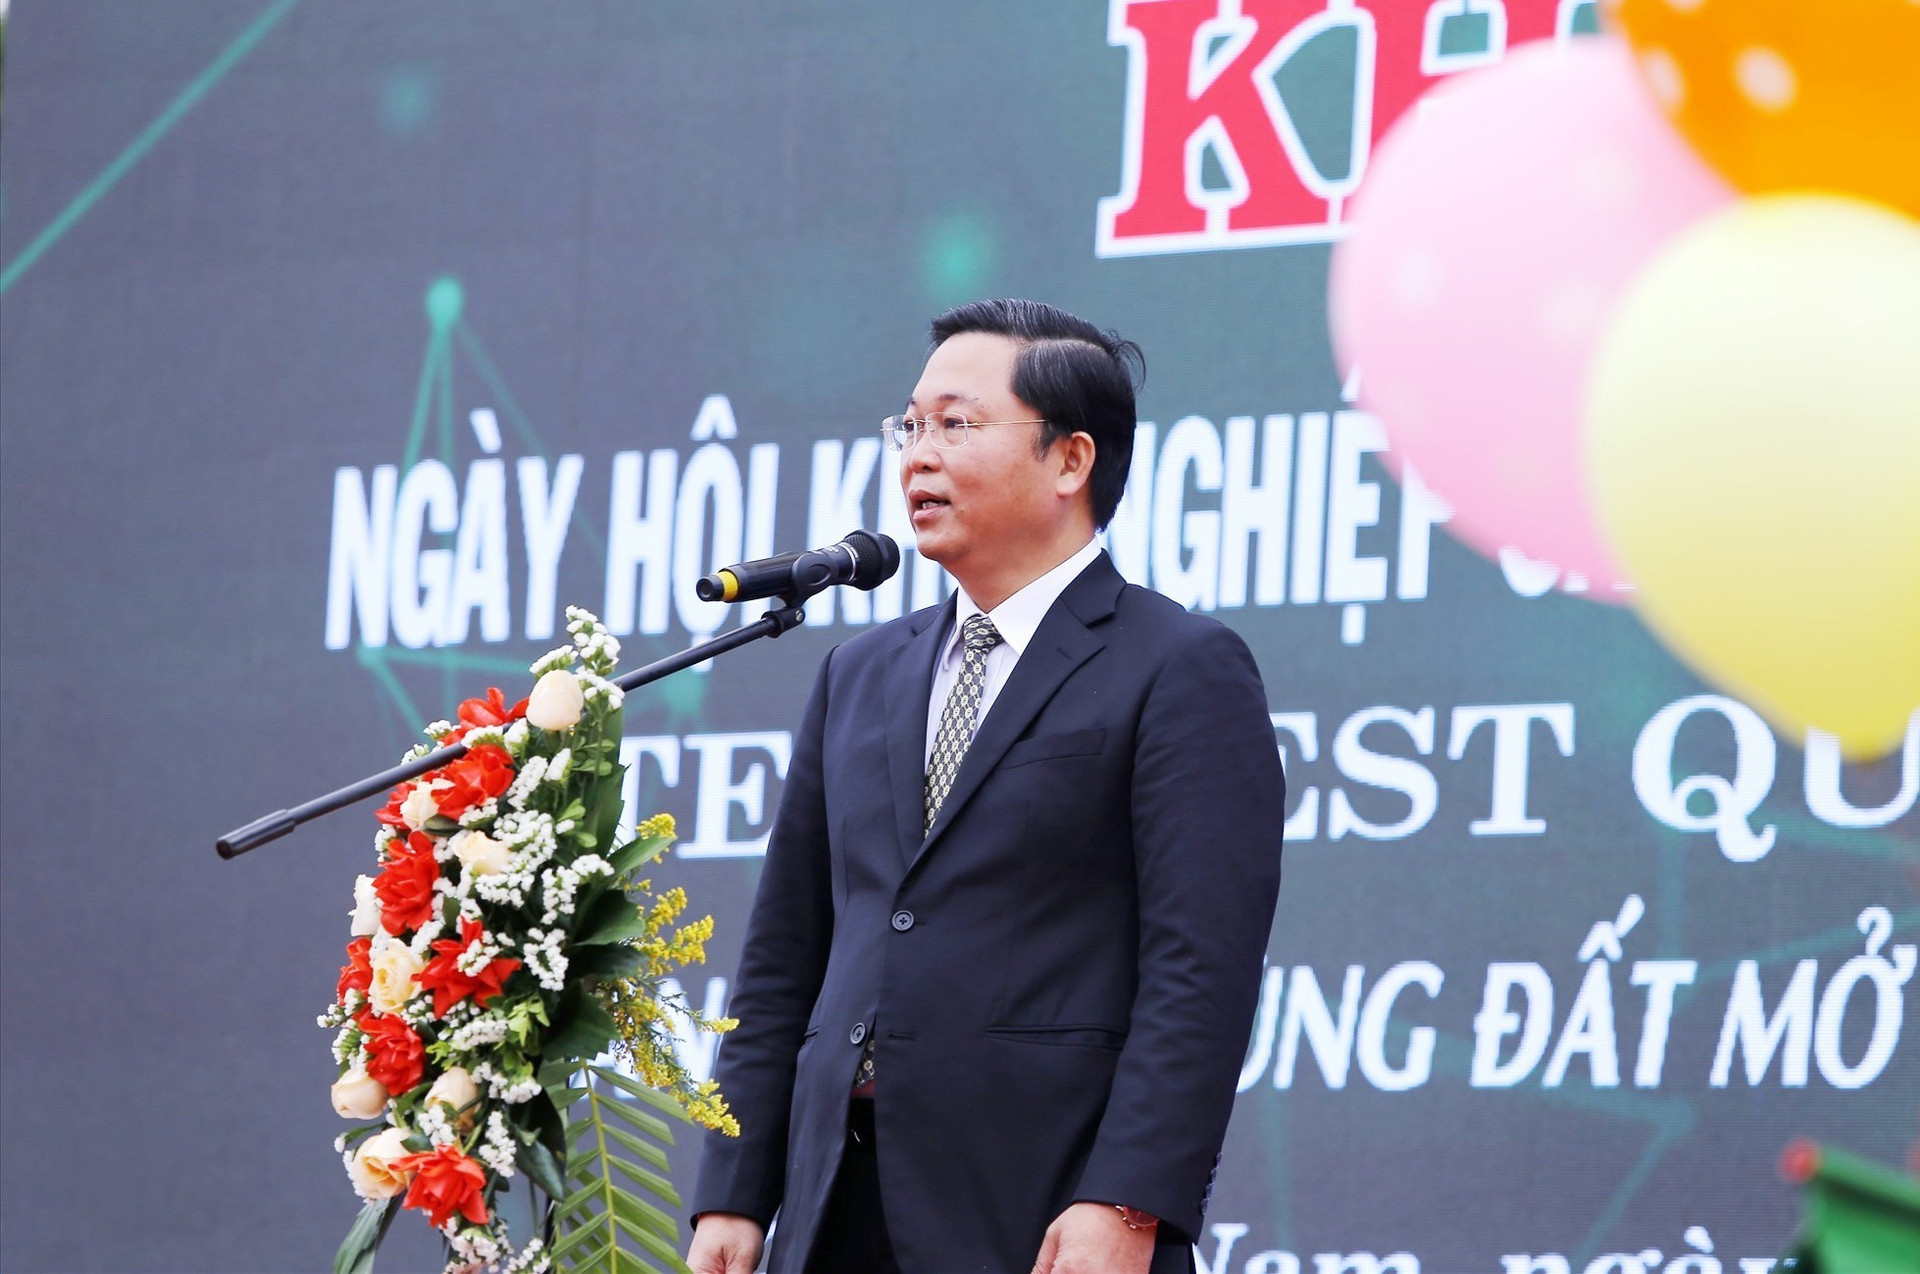 Chairman Thanh gives the speech at the festival